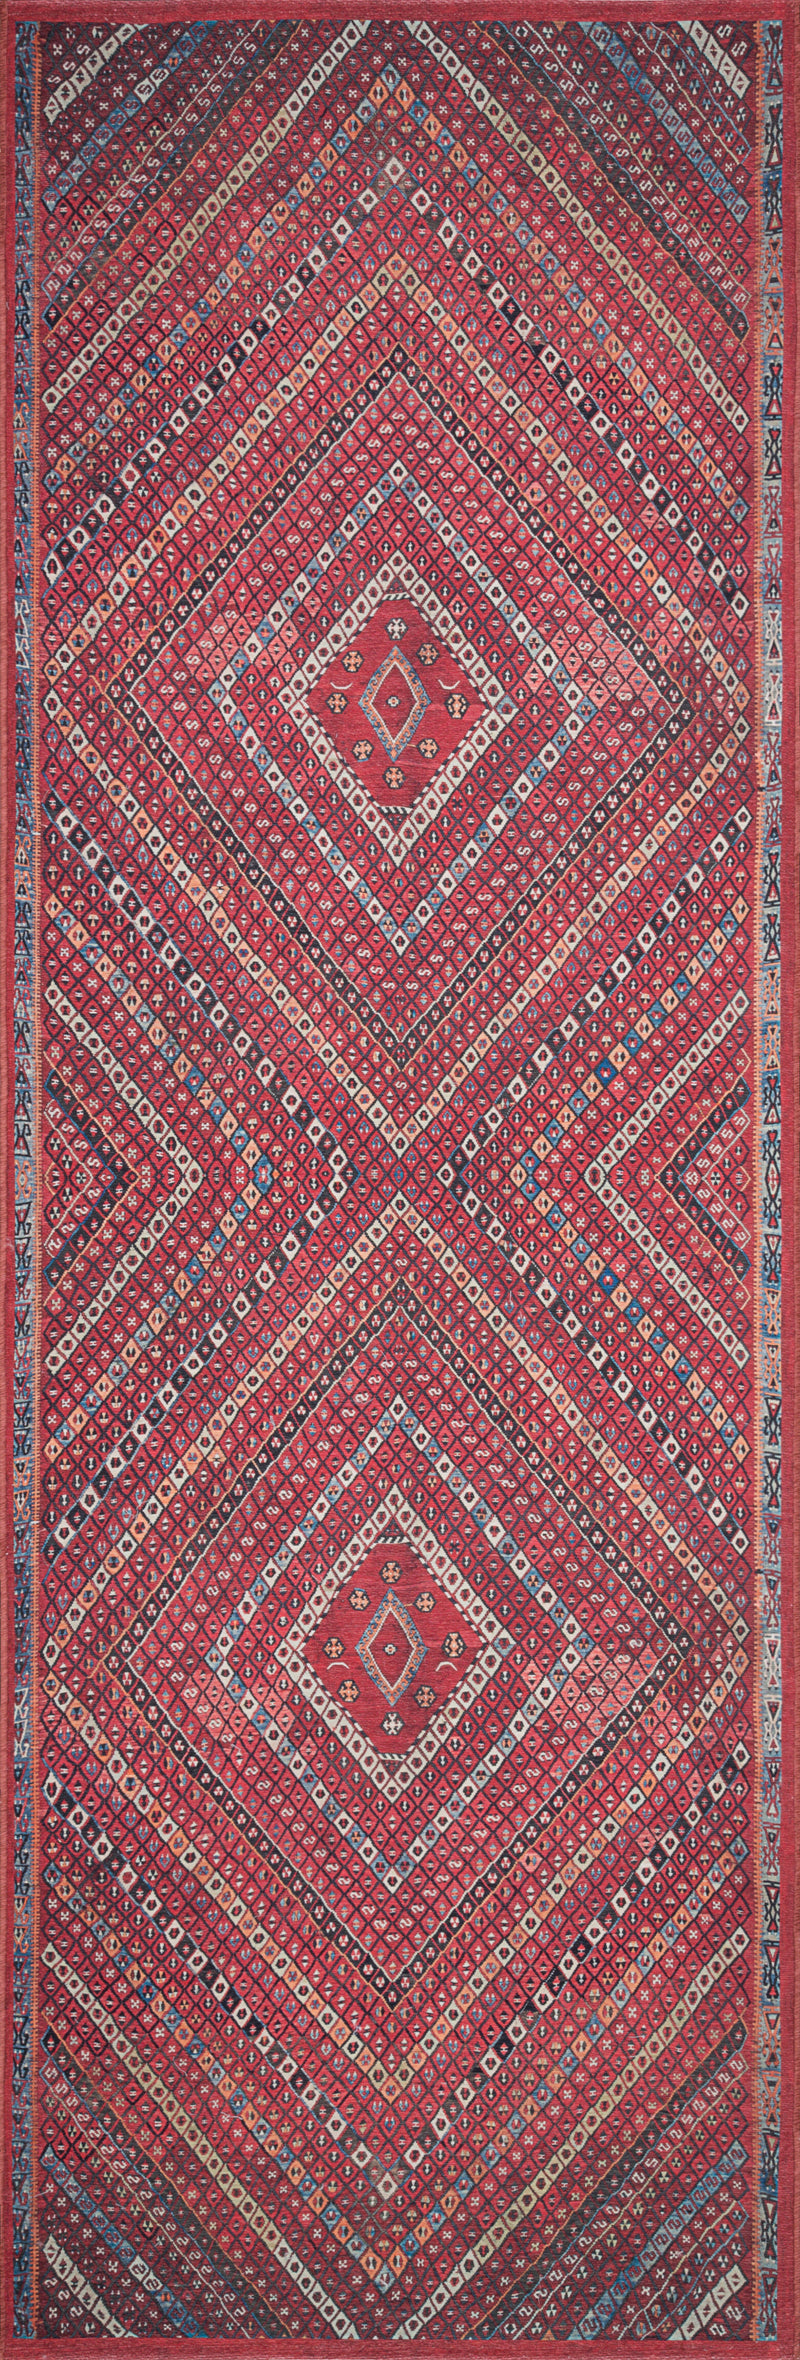 LUCCA Collection Wool/Viscose Rug  in  RED / MULTI Red Accent Power-Loomed Wool/Viscose